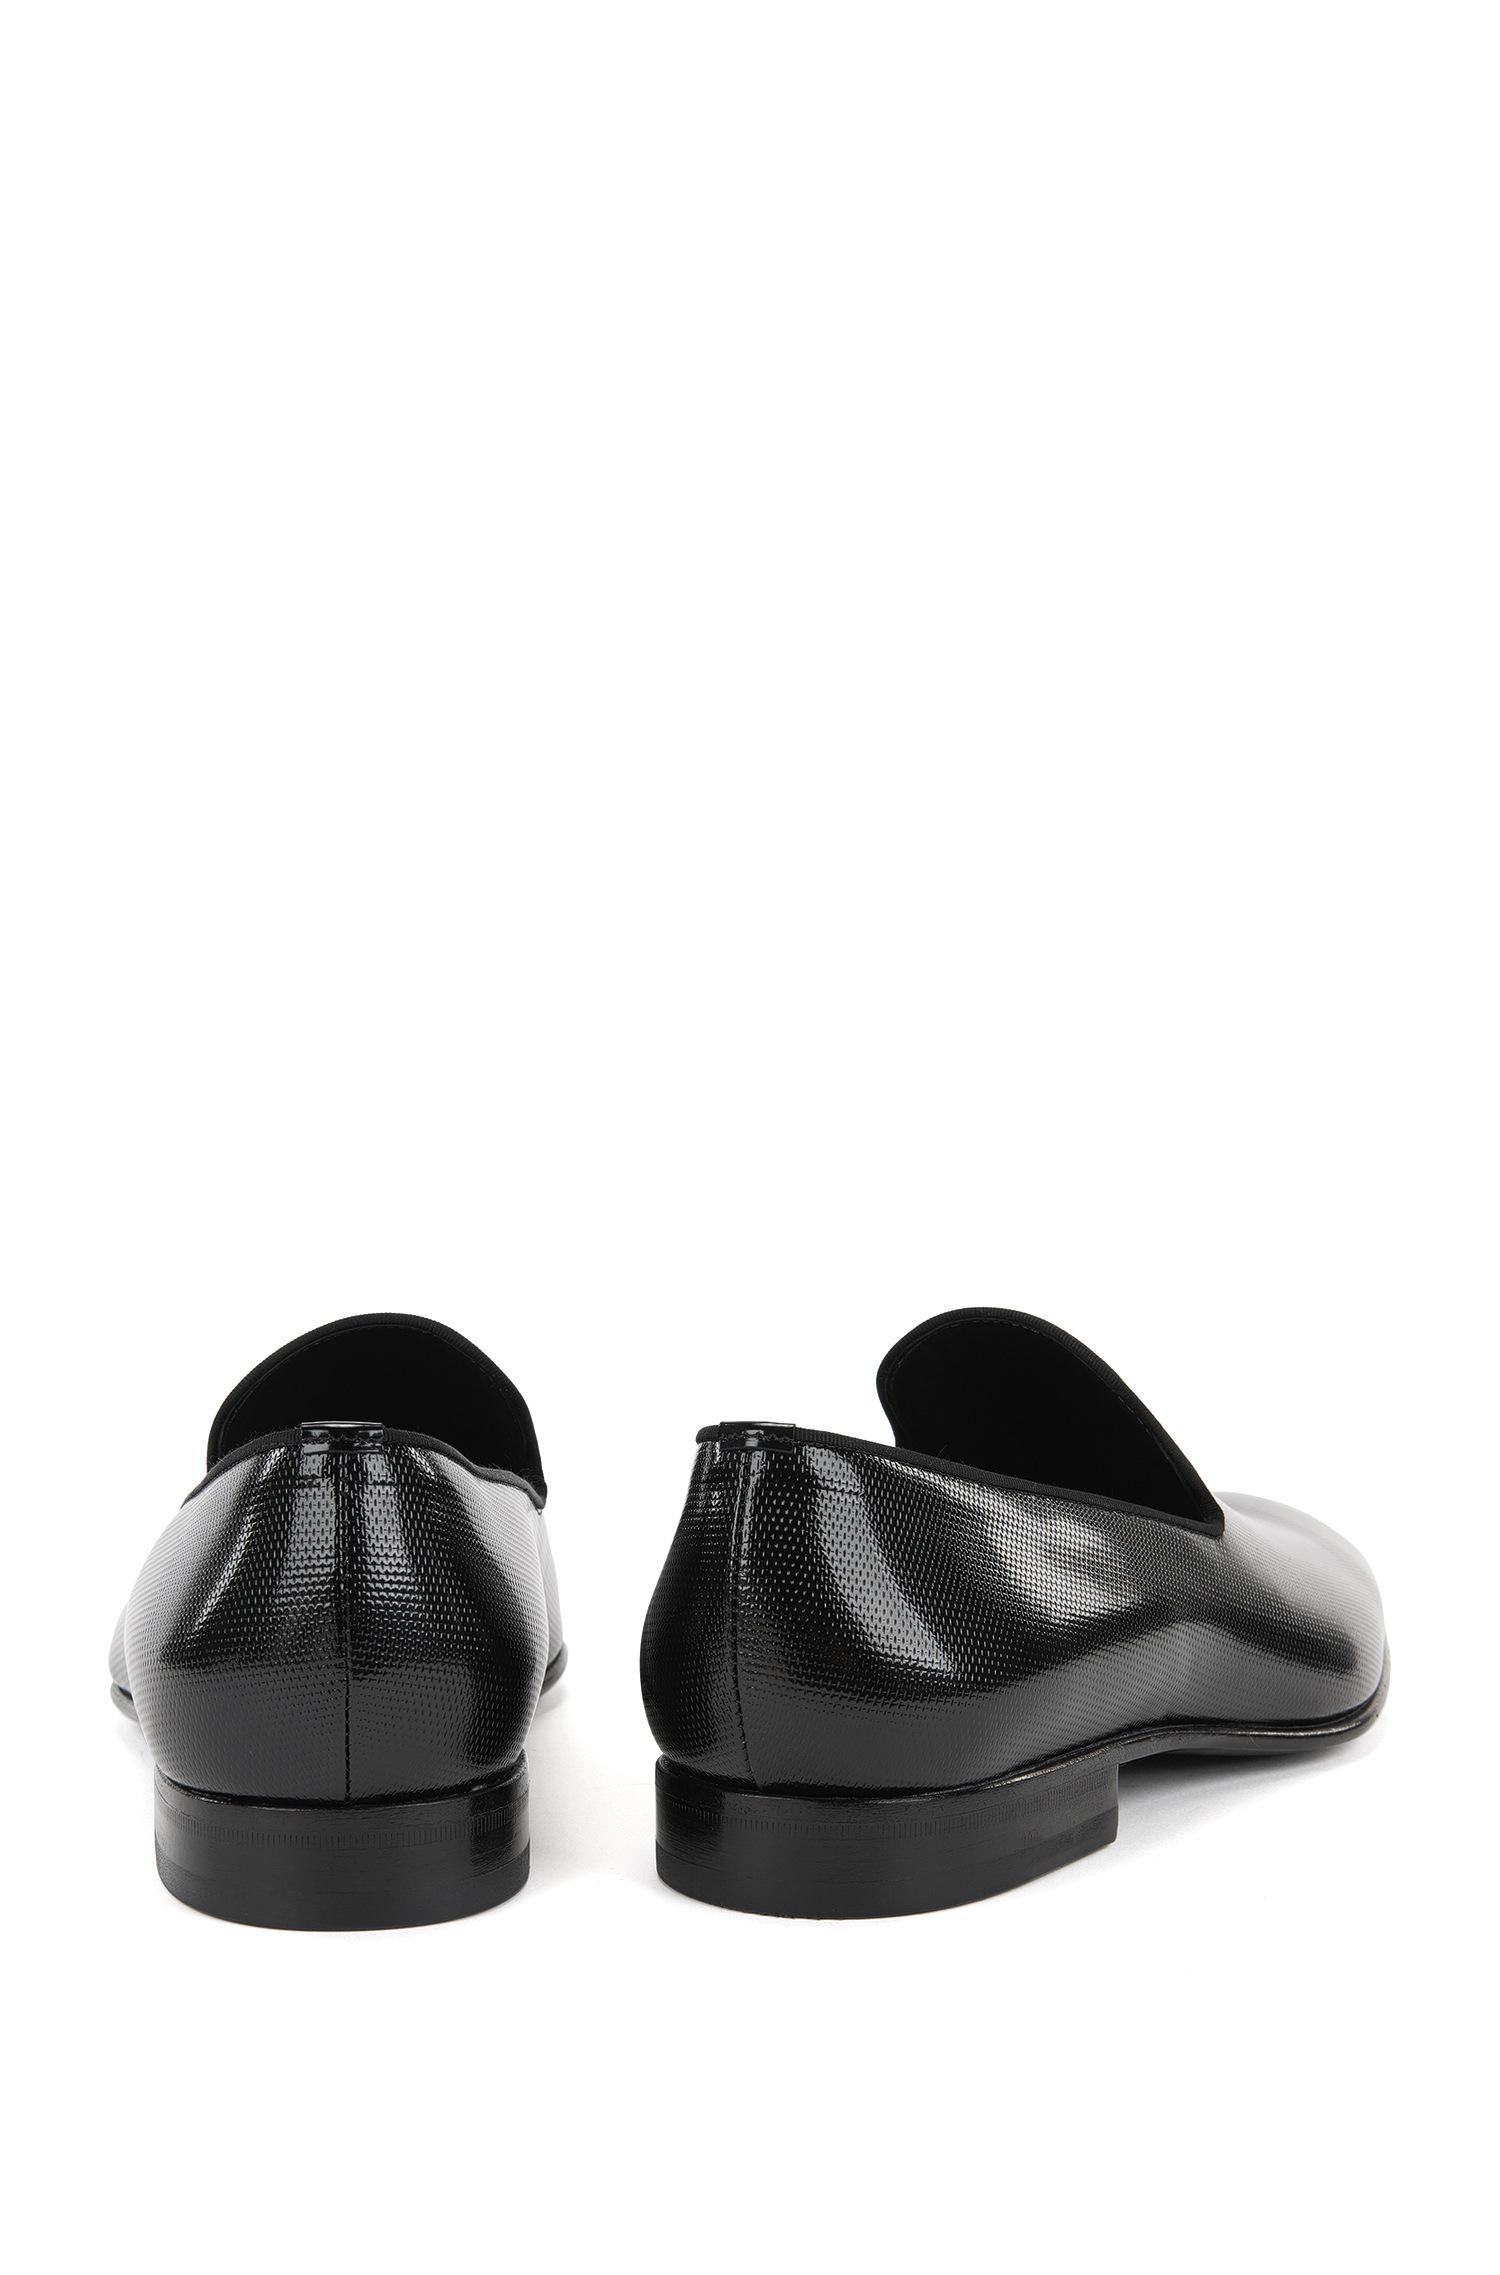 BOSS by HUGO BOSS Printed Patent Leather Slip-on Loafers | Evening Slon  Papr in Black for Men - Lyst